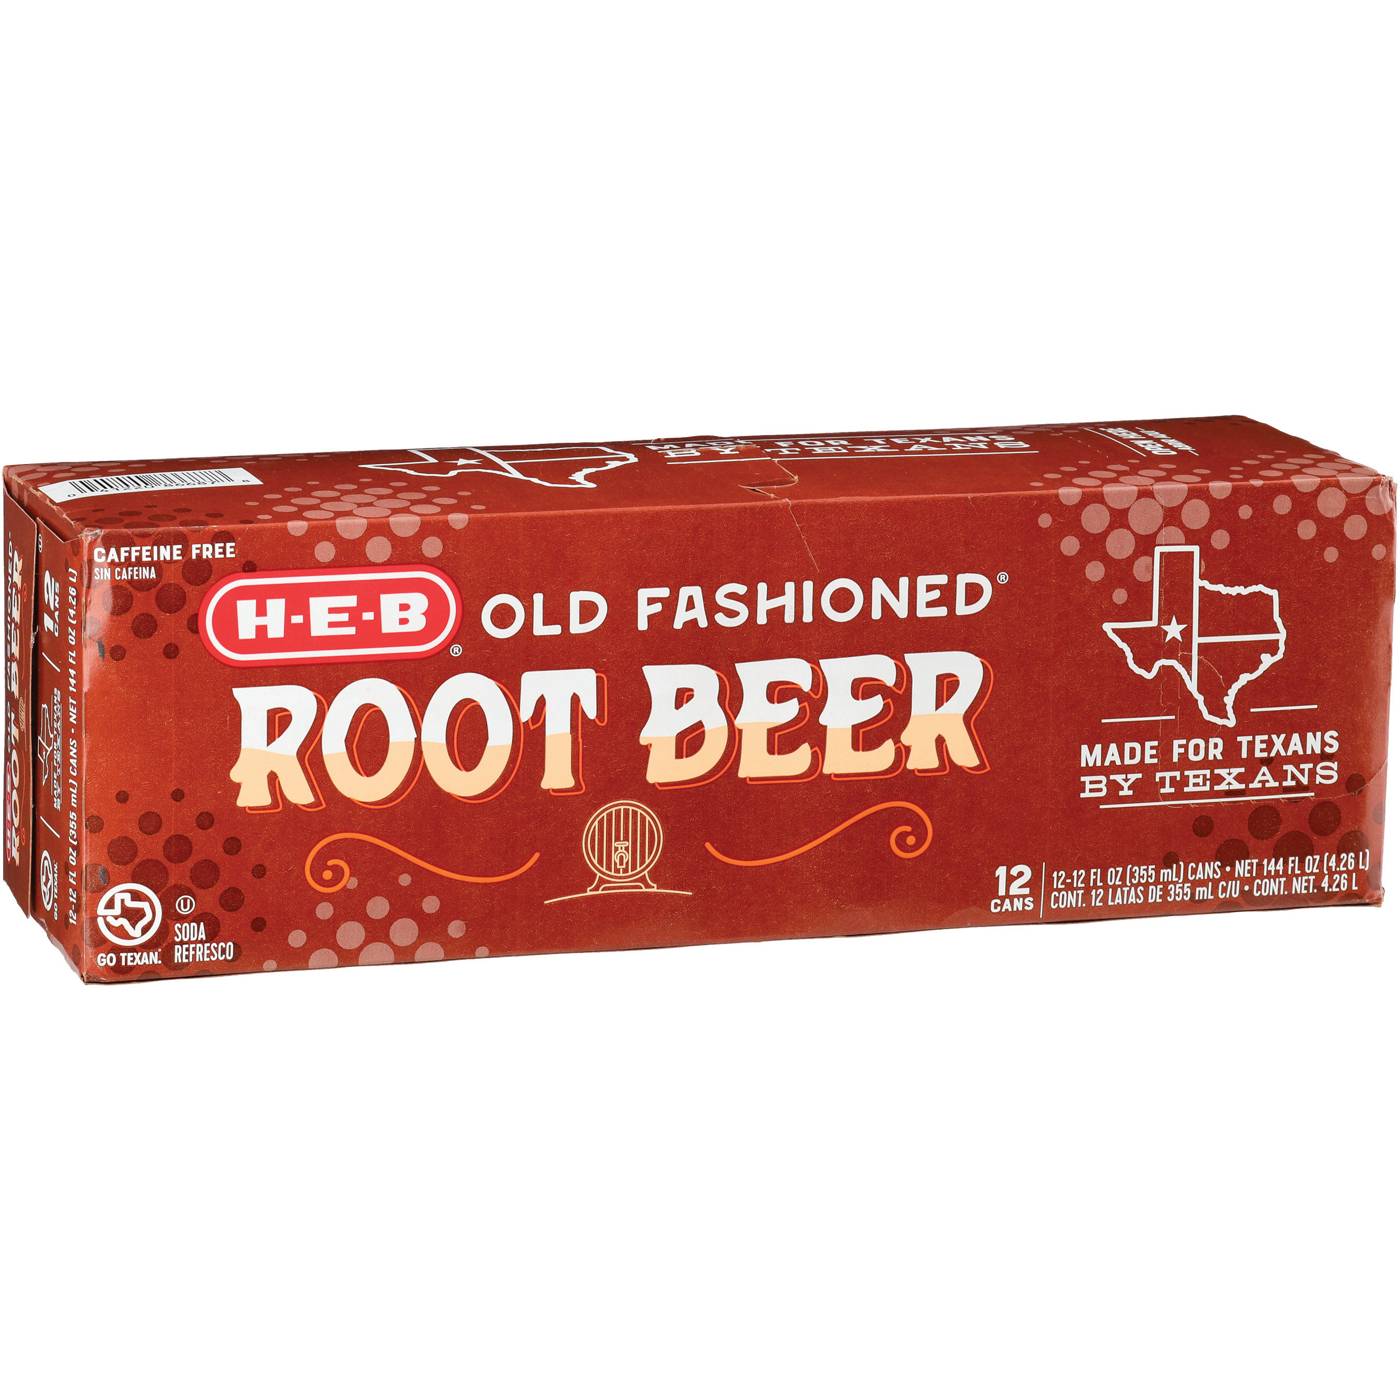 H-E-B Old Fashioned Root Beer Soda 12 pk Cans; image 2 of 2